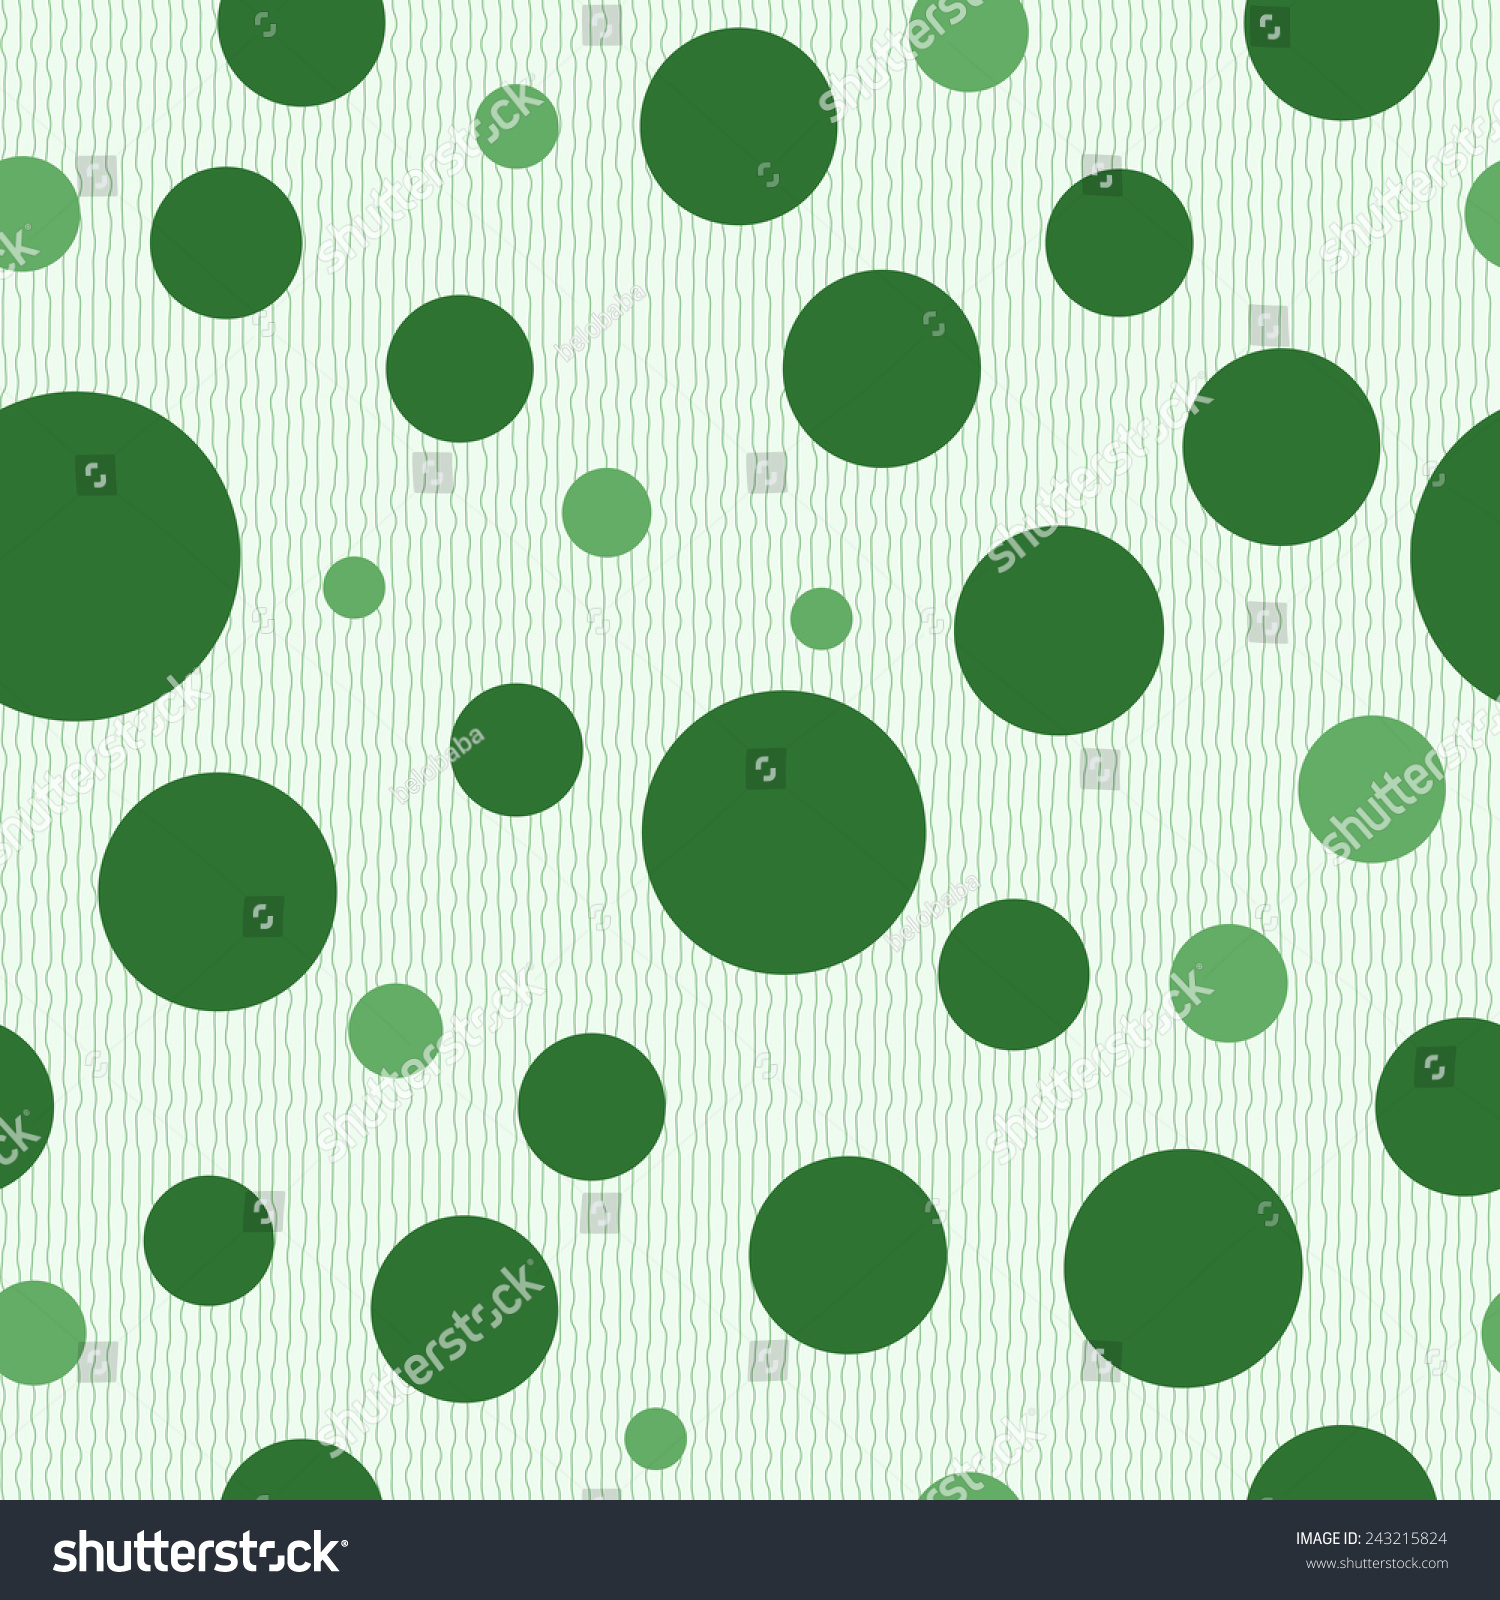 Backgrounds Seamless Pattern Green Circles Stock Vector (2018 ...